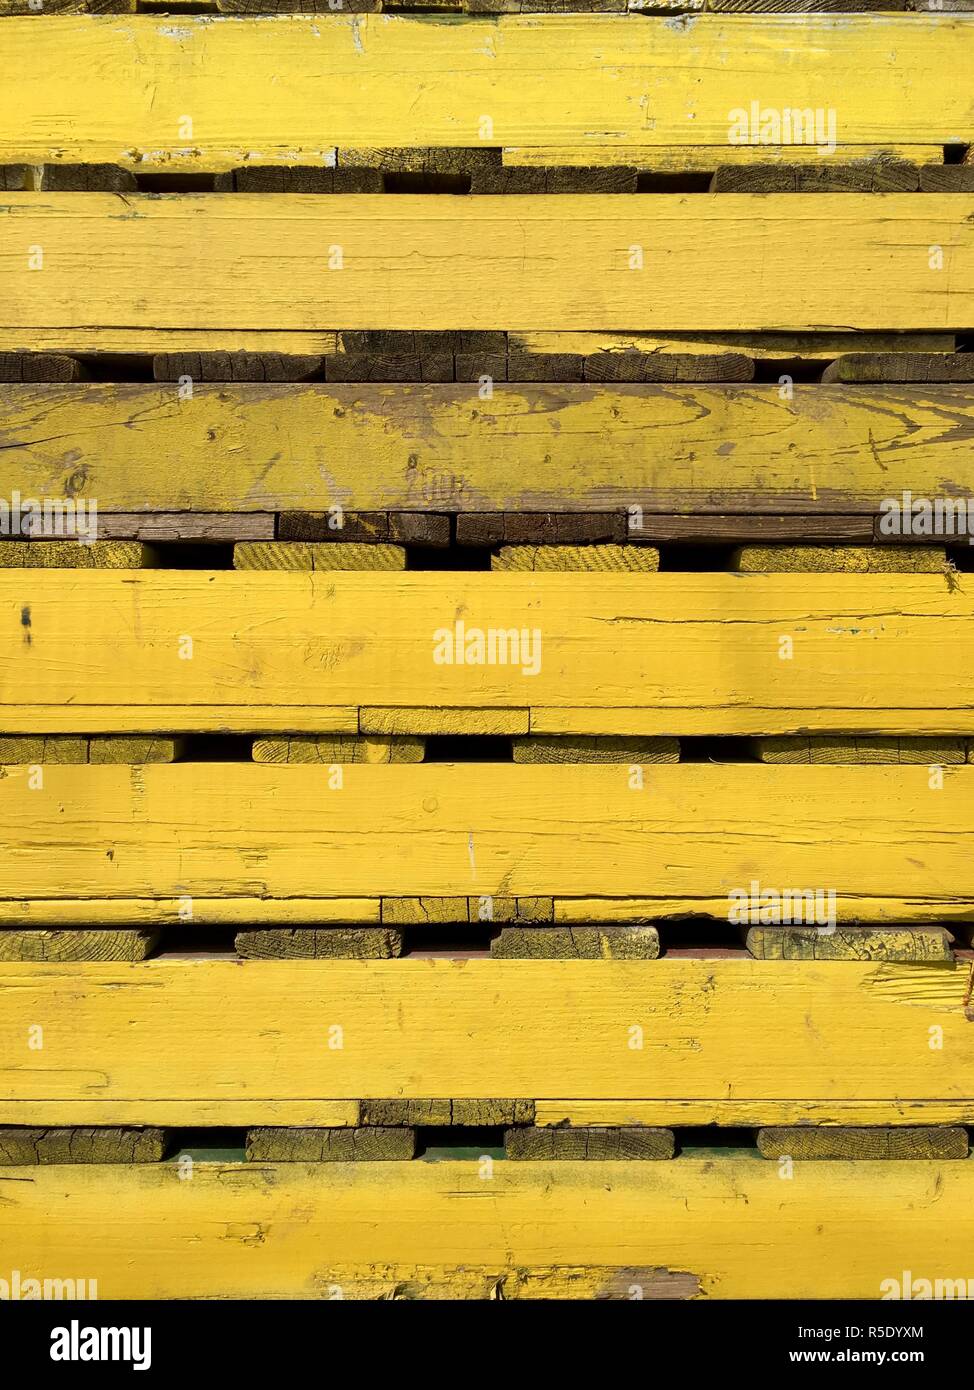 yellow wooden pallets for the transport in close-up Stock Photo